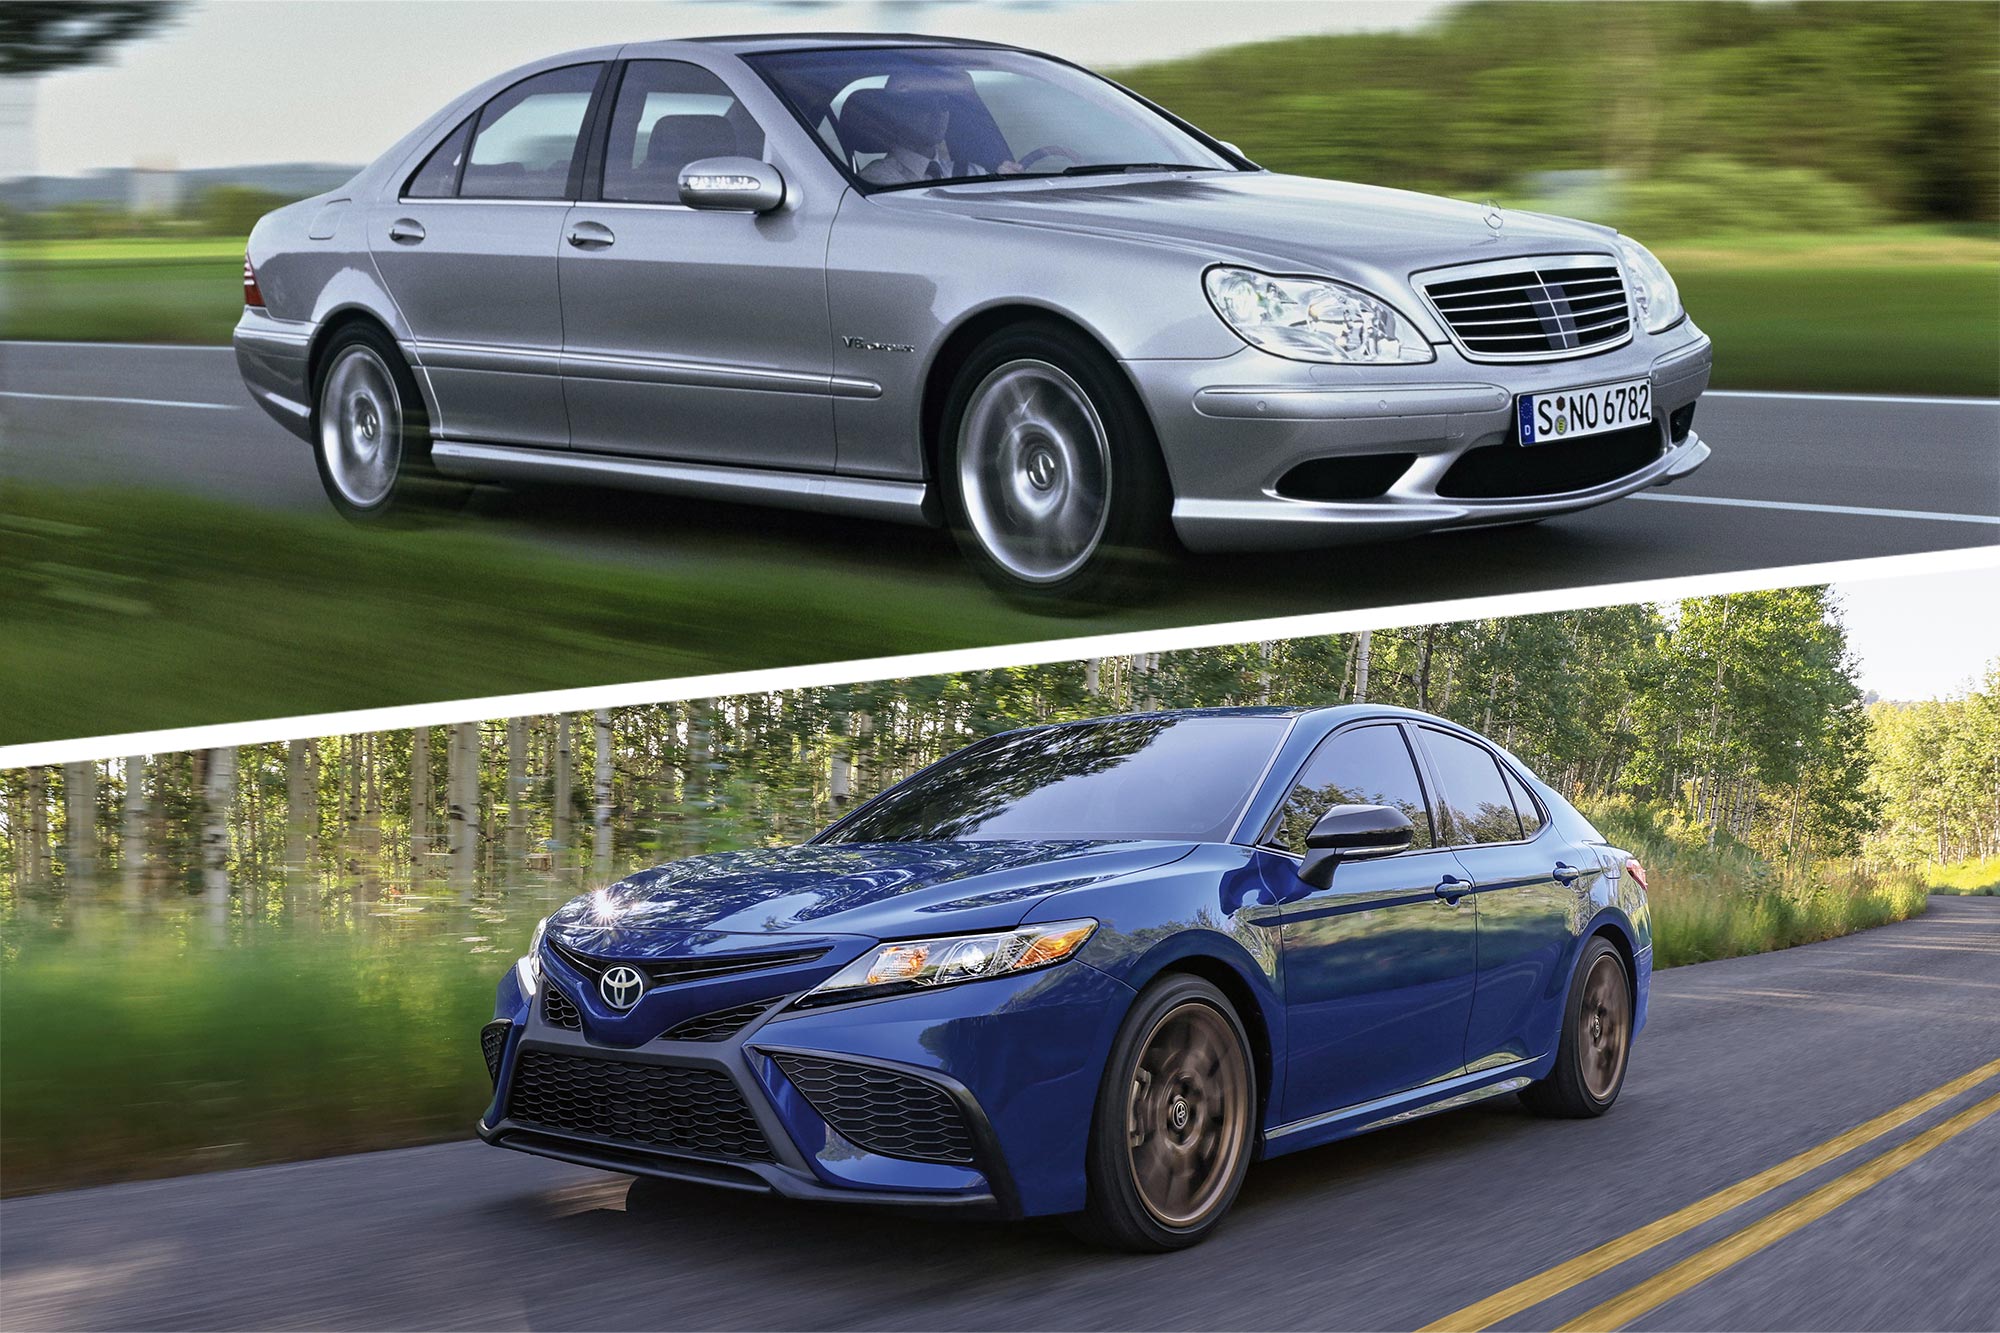 2004 Mercedes-Benz S-Class and 2024 Toyota Camry combination image.